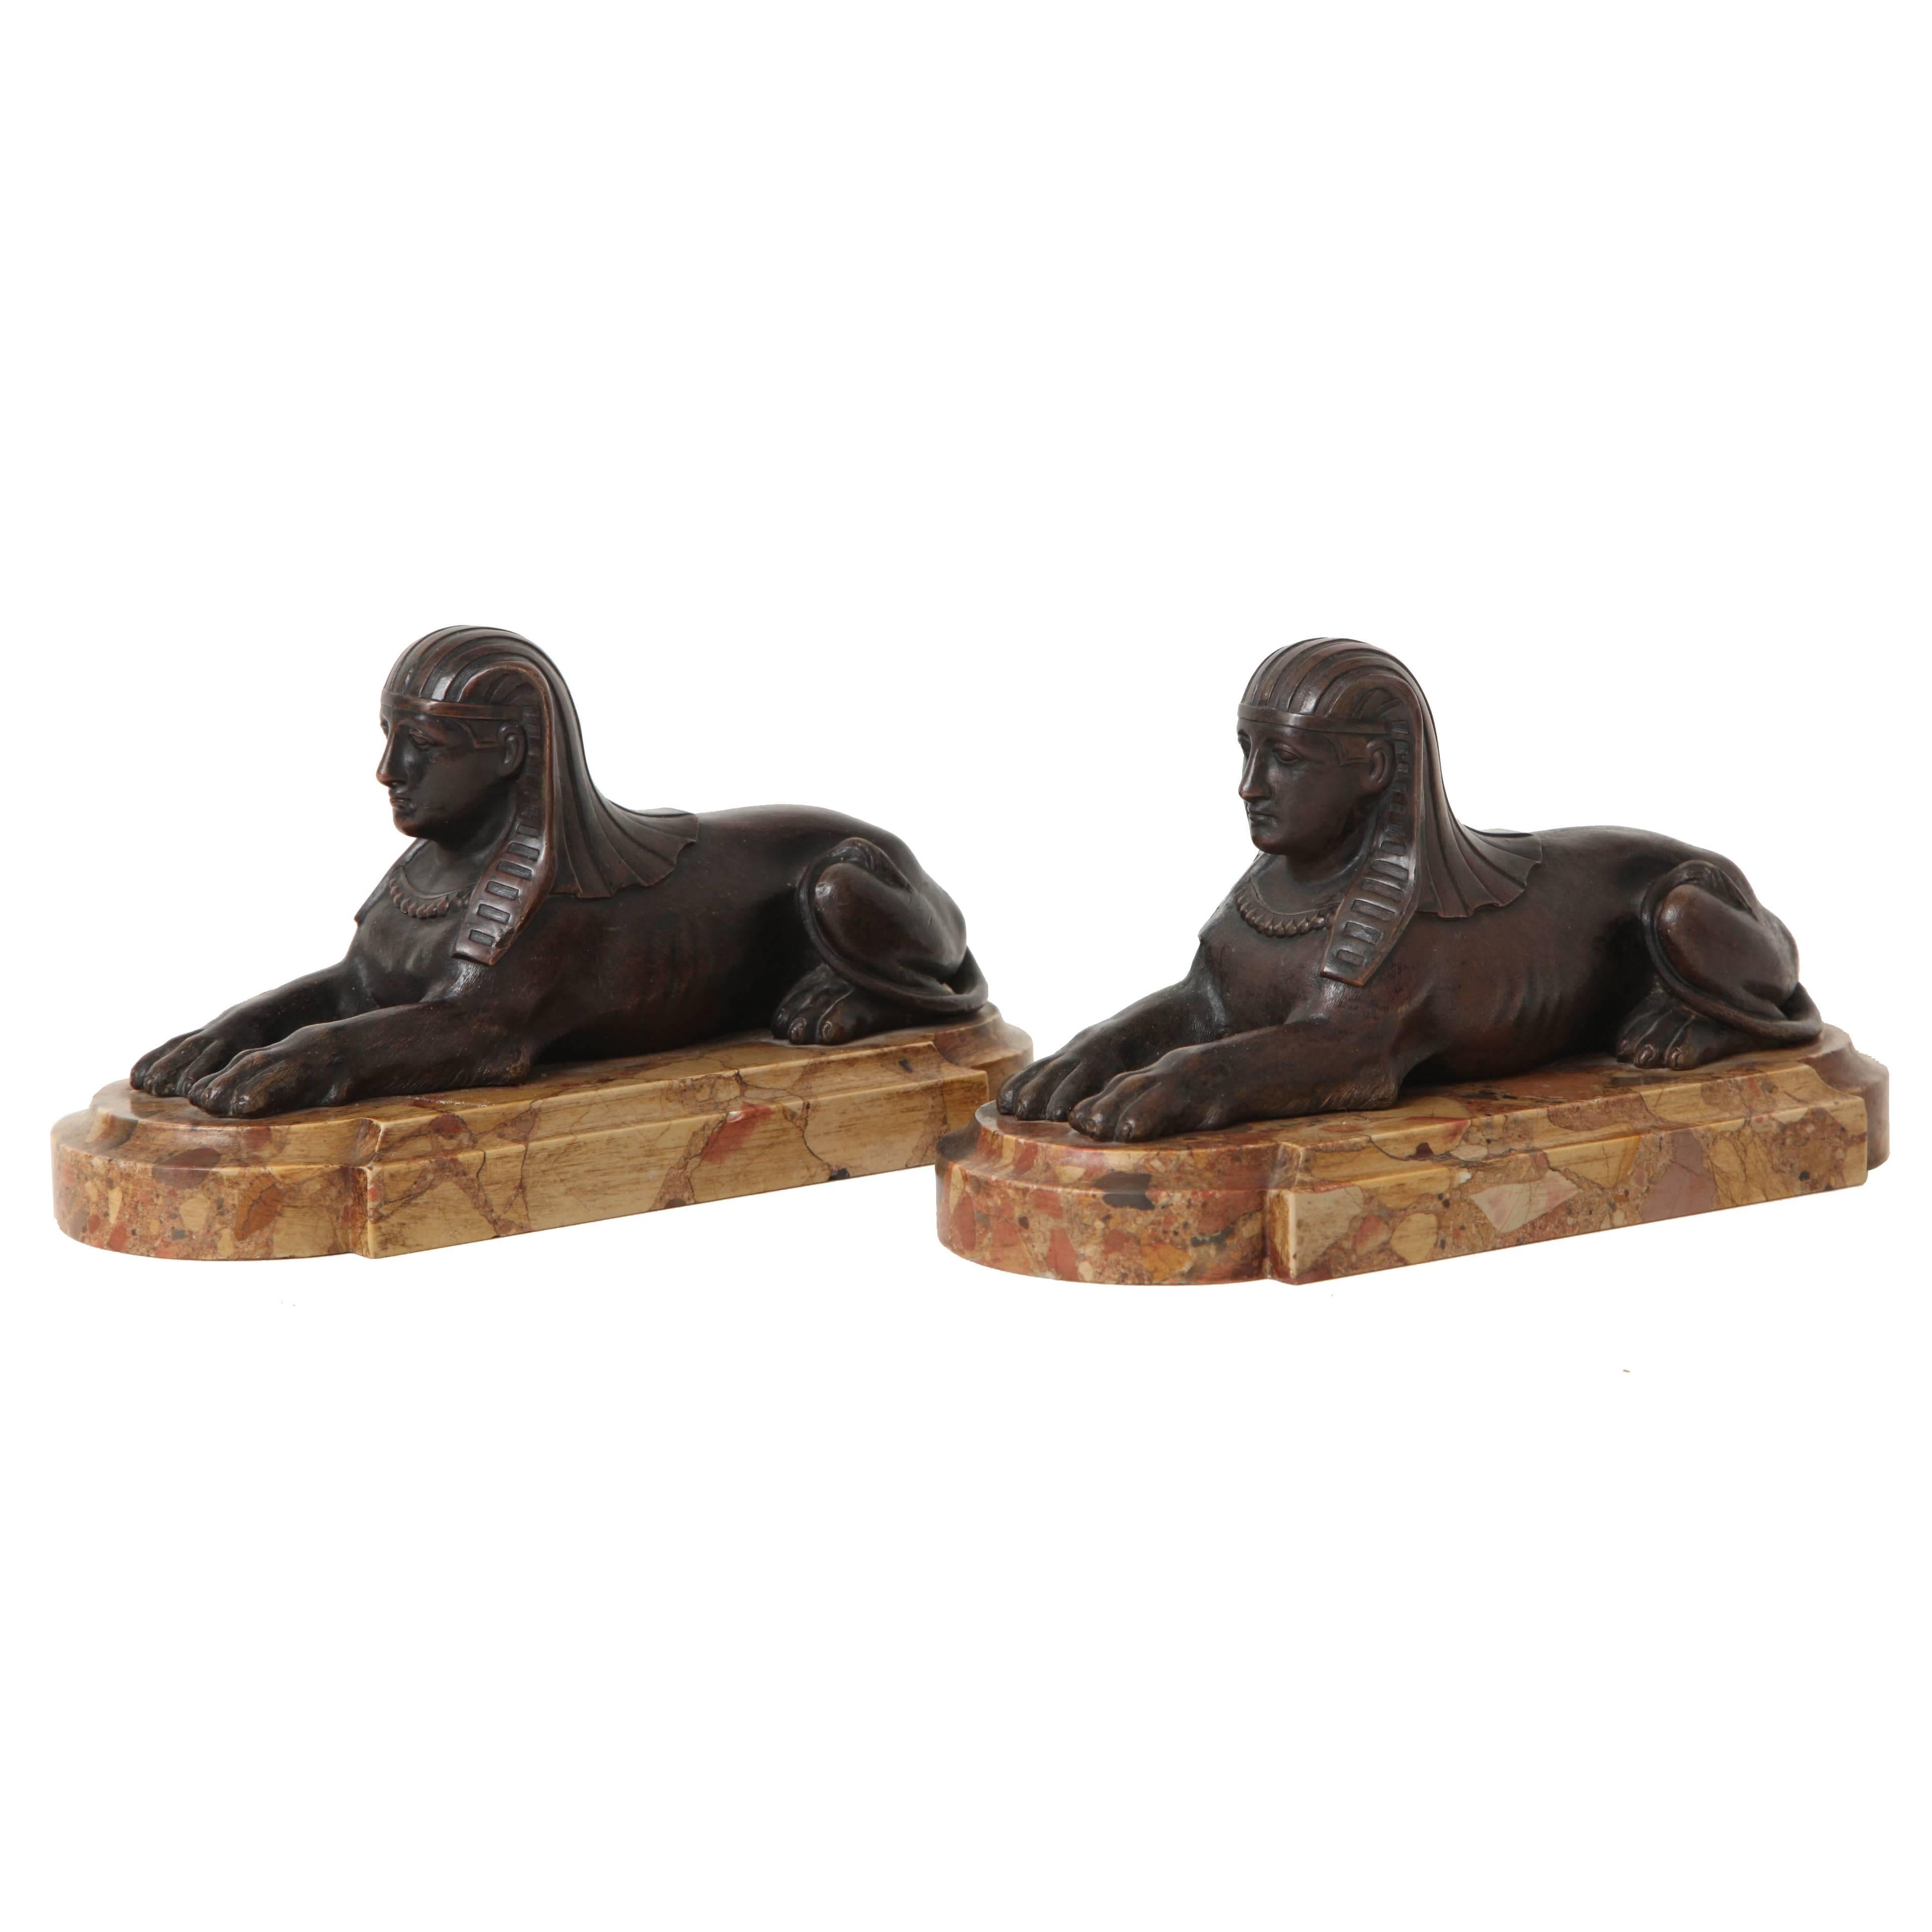 A Pair of Early 19th Century Bronze Sphinxes